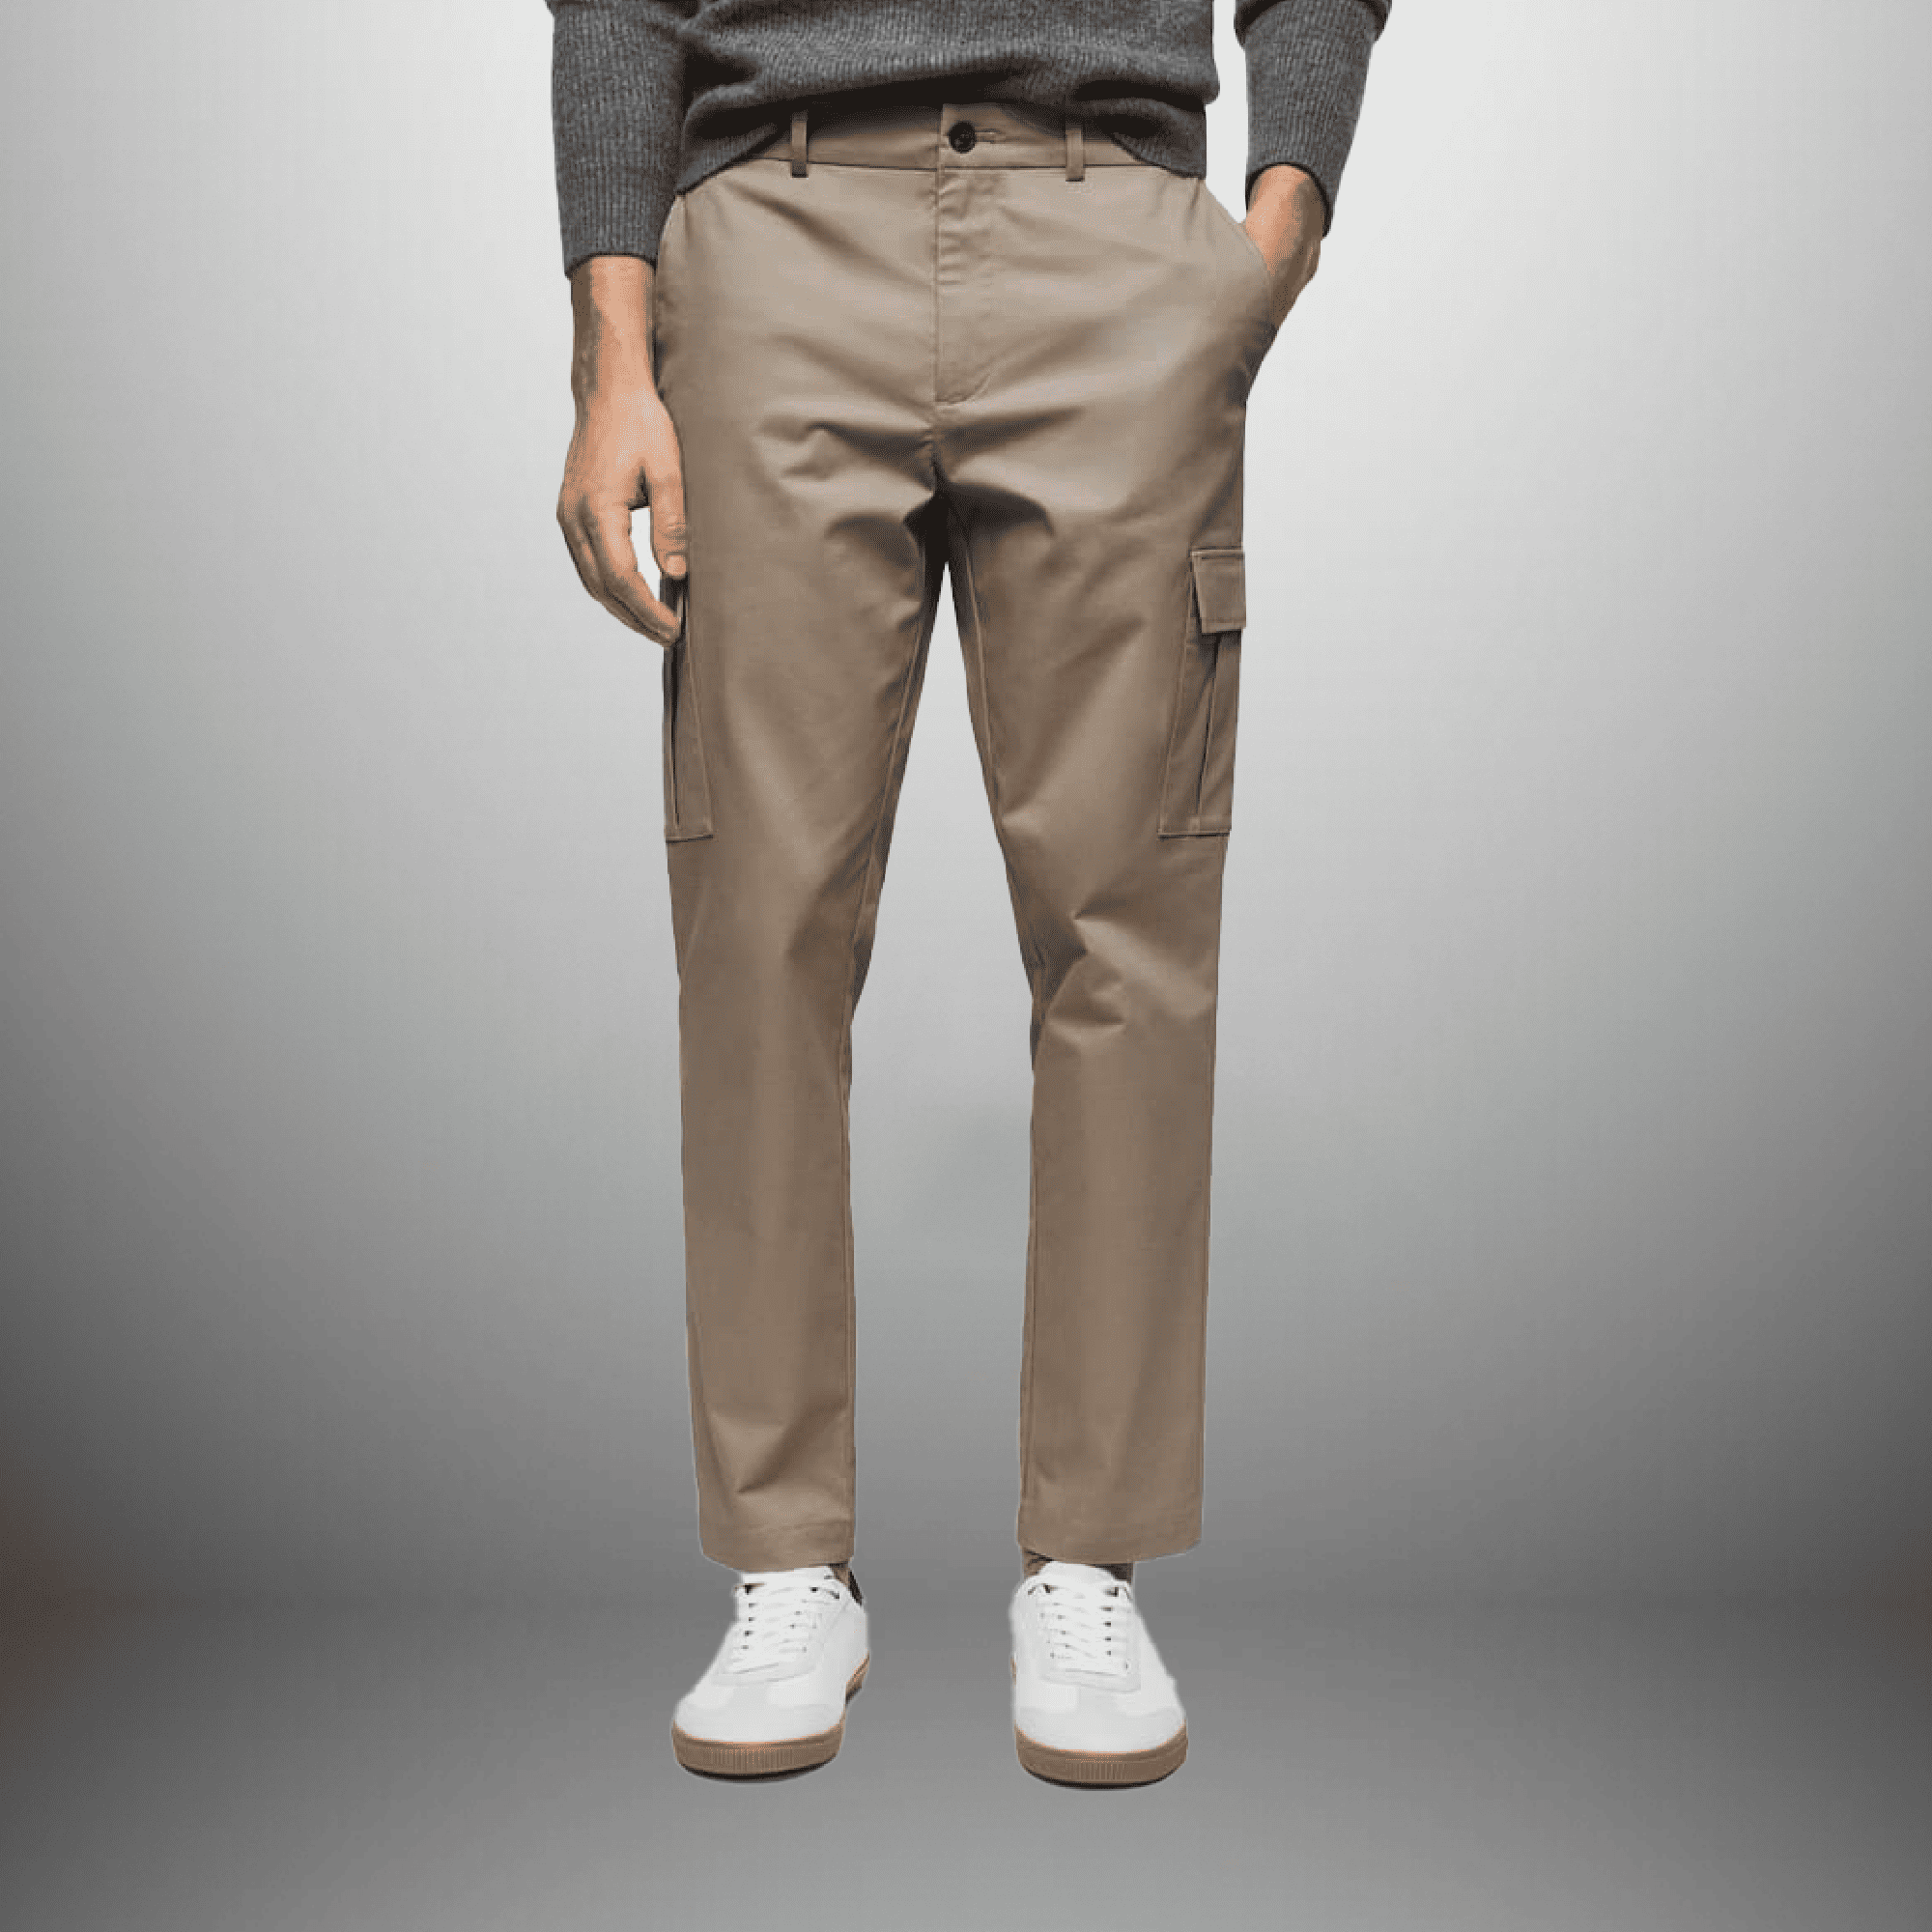 Men's Royal Beige Relaxed Fit Cargo Pant-RMT009